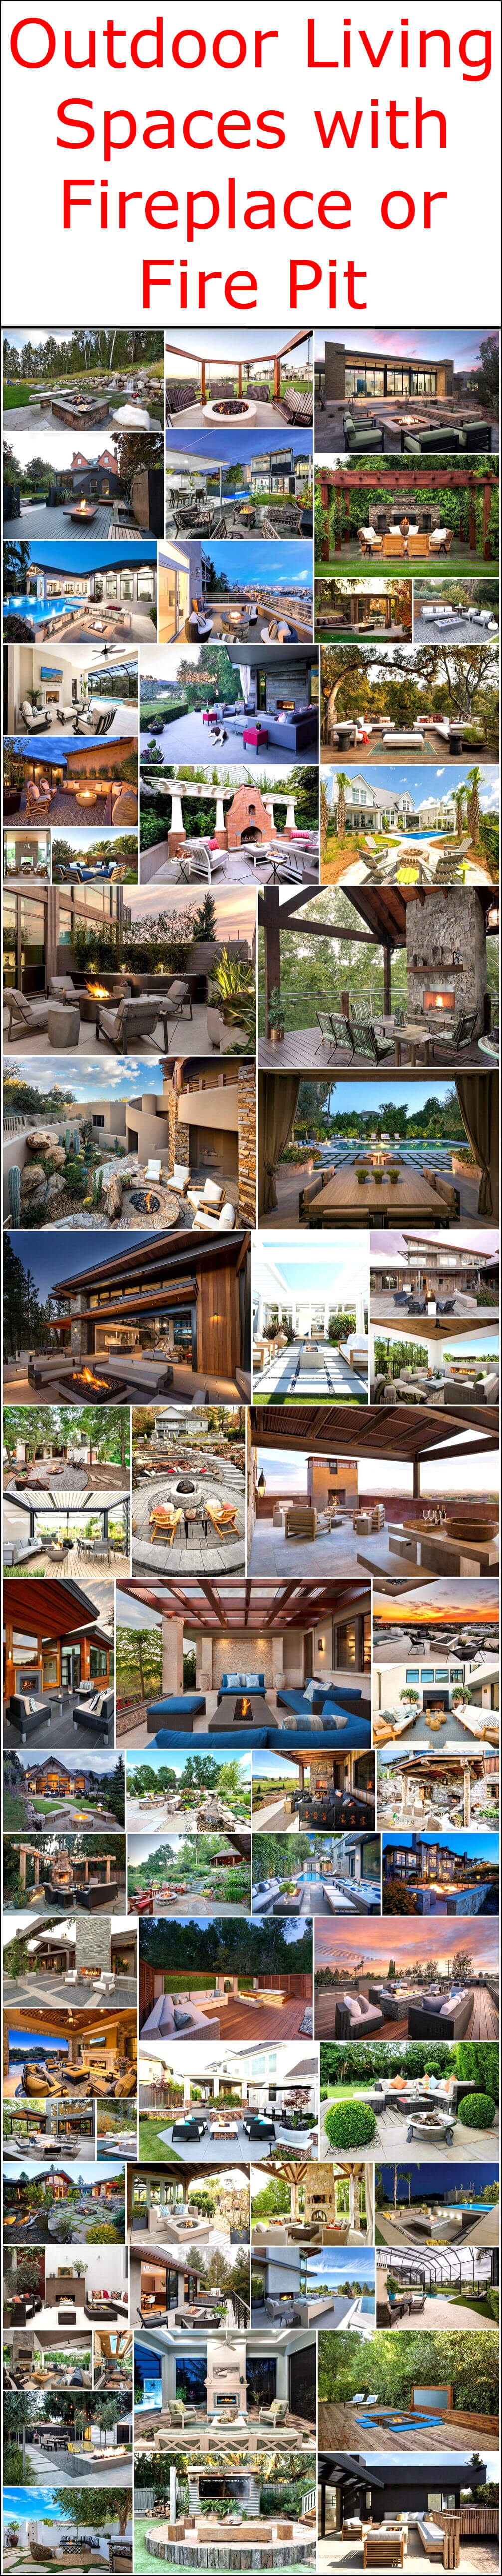 Outdoor Living Spaces with Fireplace or Fire Pit